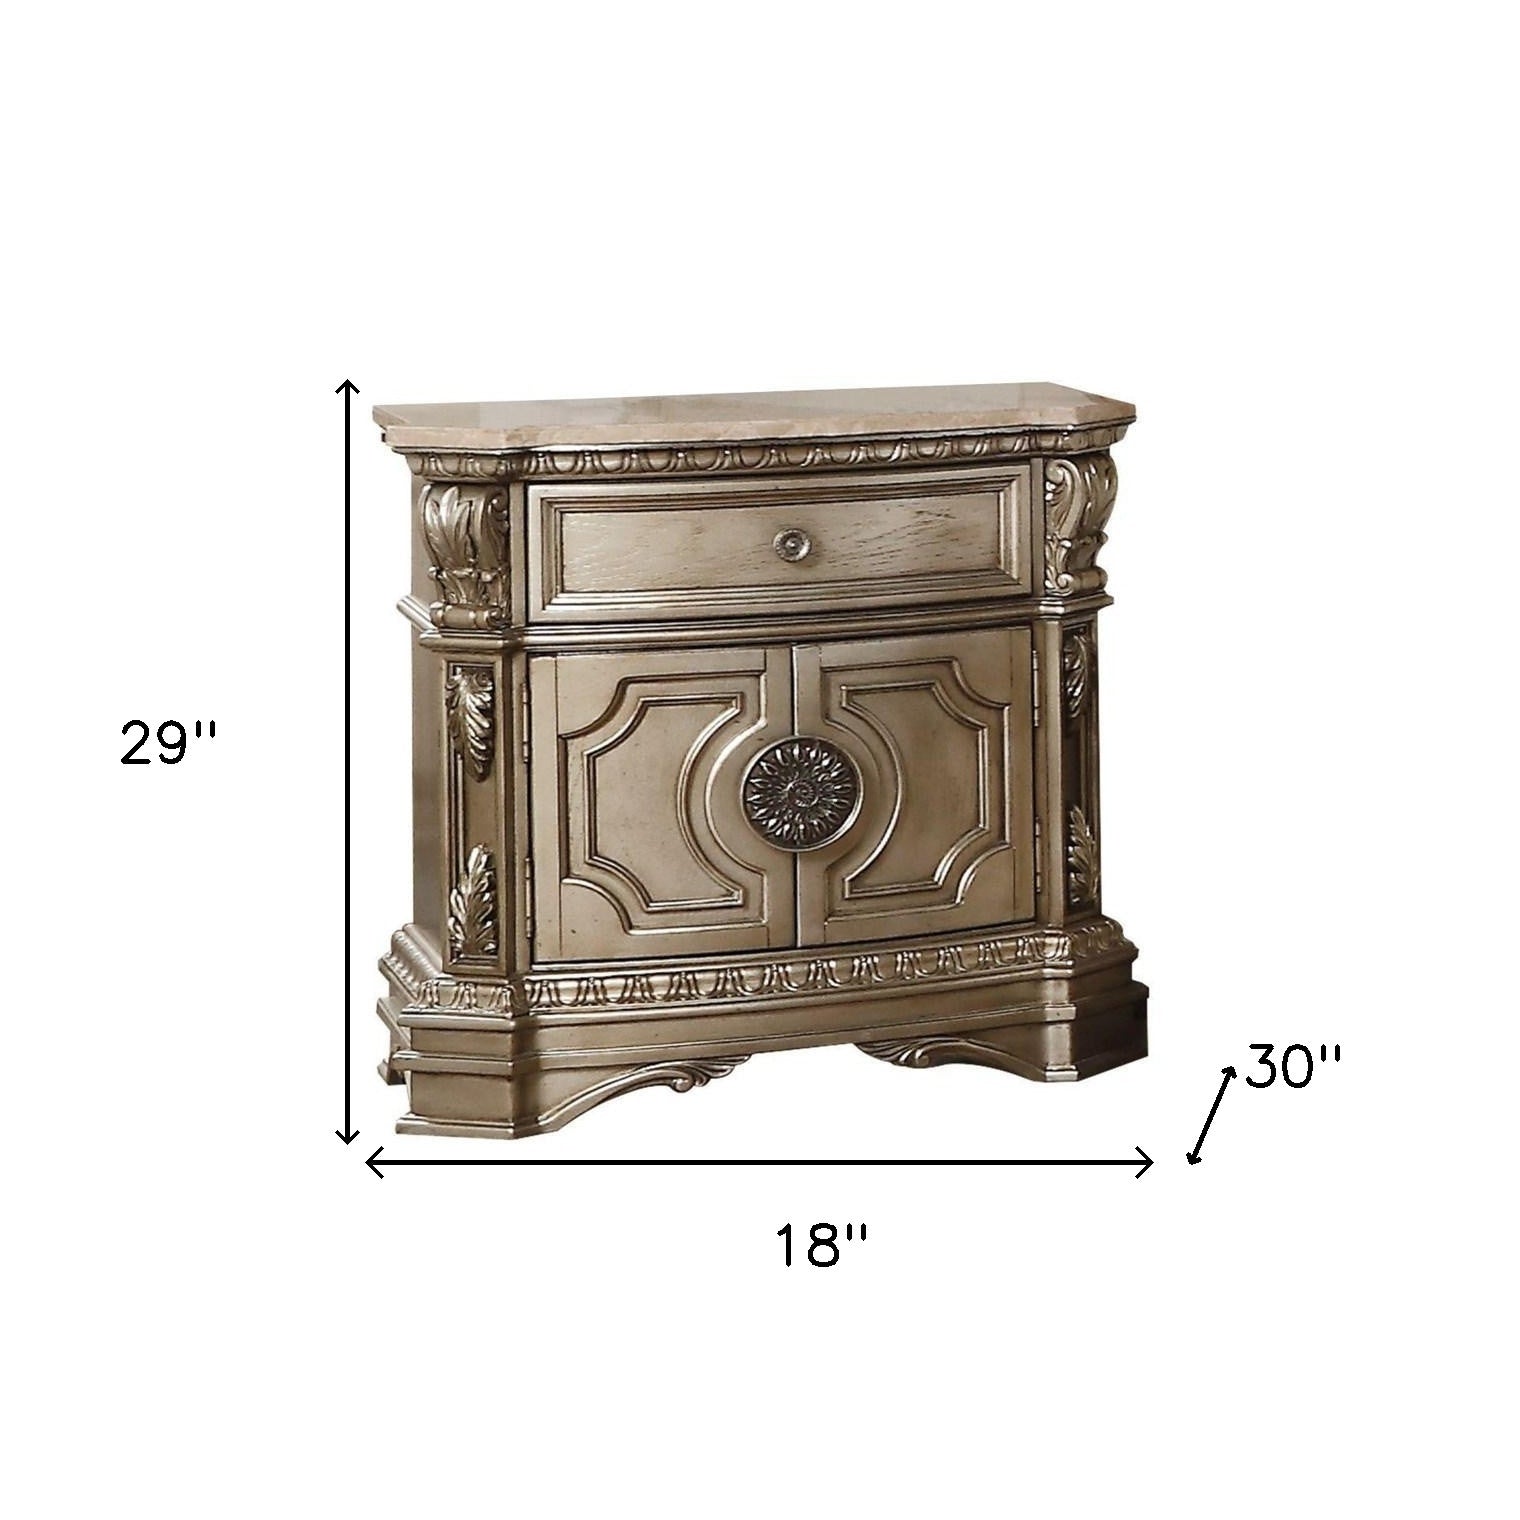 29" Champagne One Drawer Faux Marble and Solid Wood Nightstand With Storage